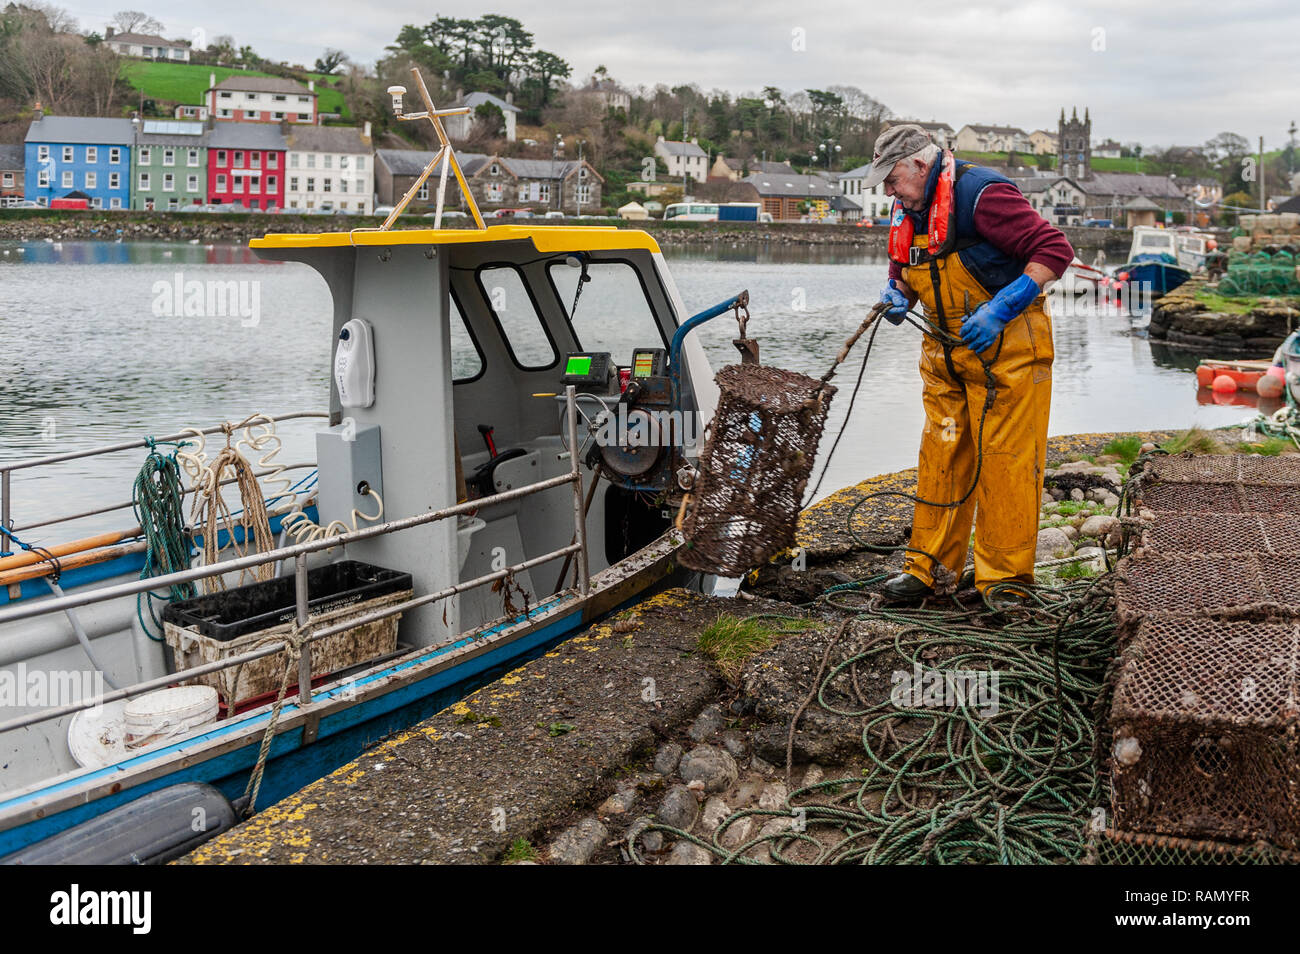 Bantry, West Cork, Ireland. 4th January, 2019. A fisherman unloads his crab pots after a fishing trip in Bantry Bay. Credit: Andy Gibson/Alamy Live News. Stock Photo